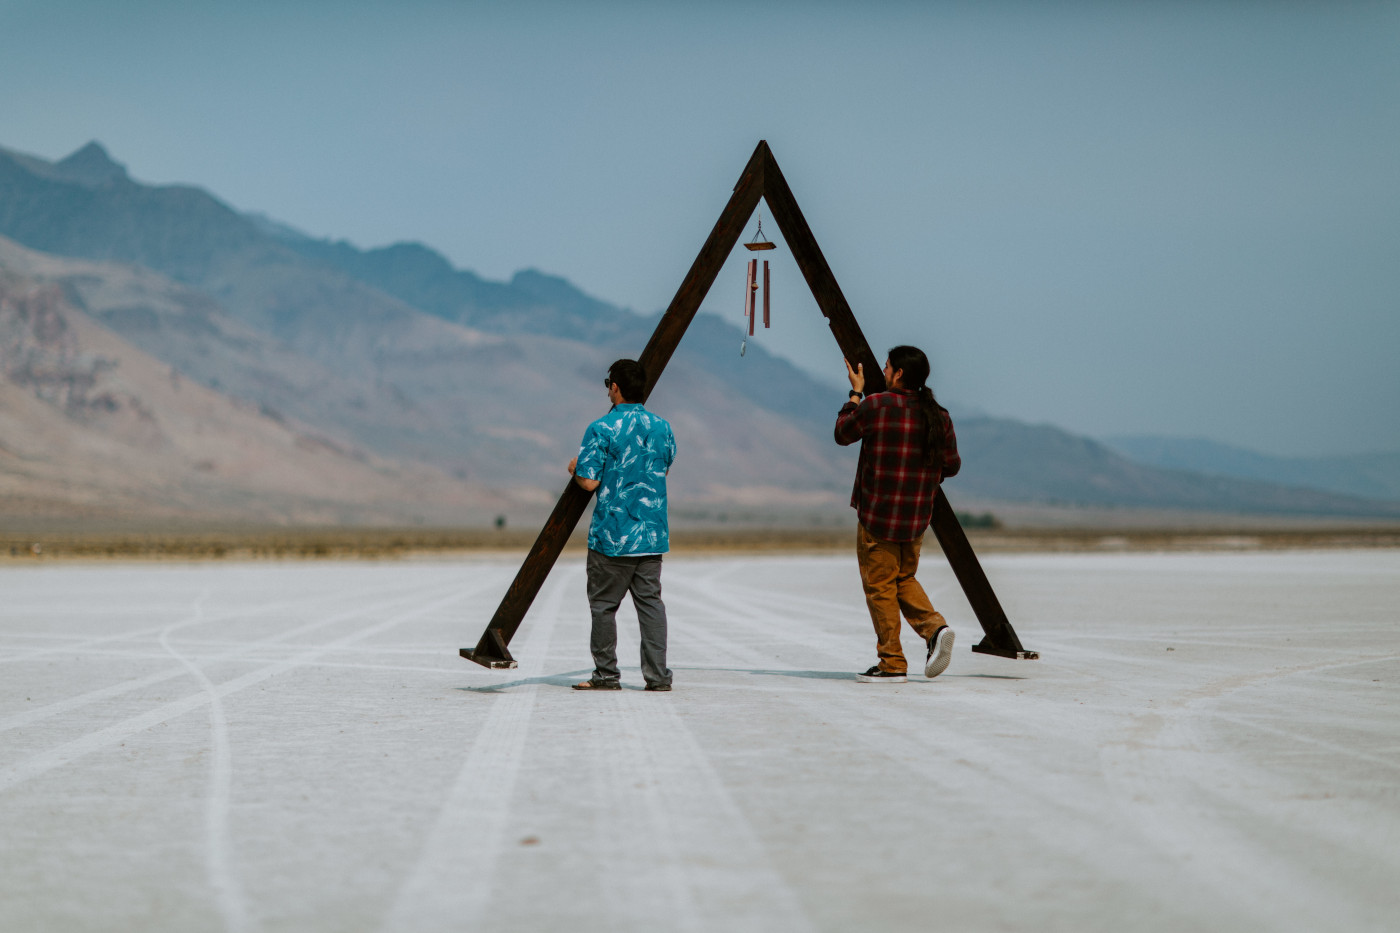 Cameron and his friend place the altar in the Alvord Desert.